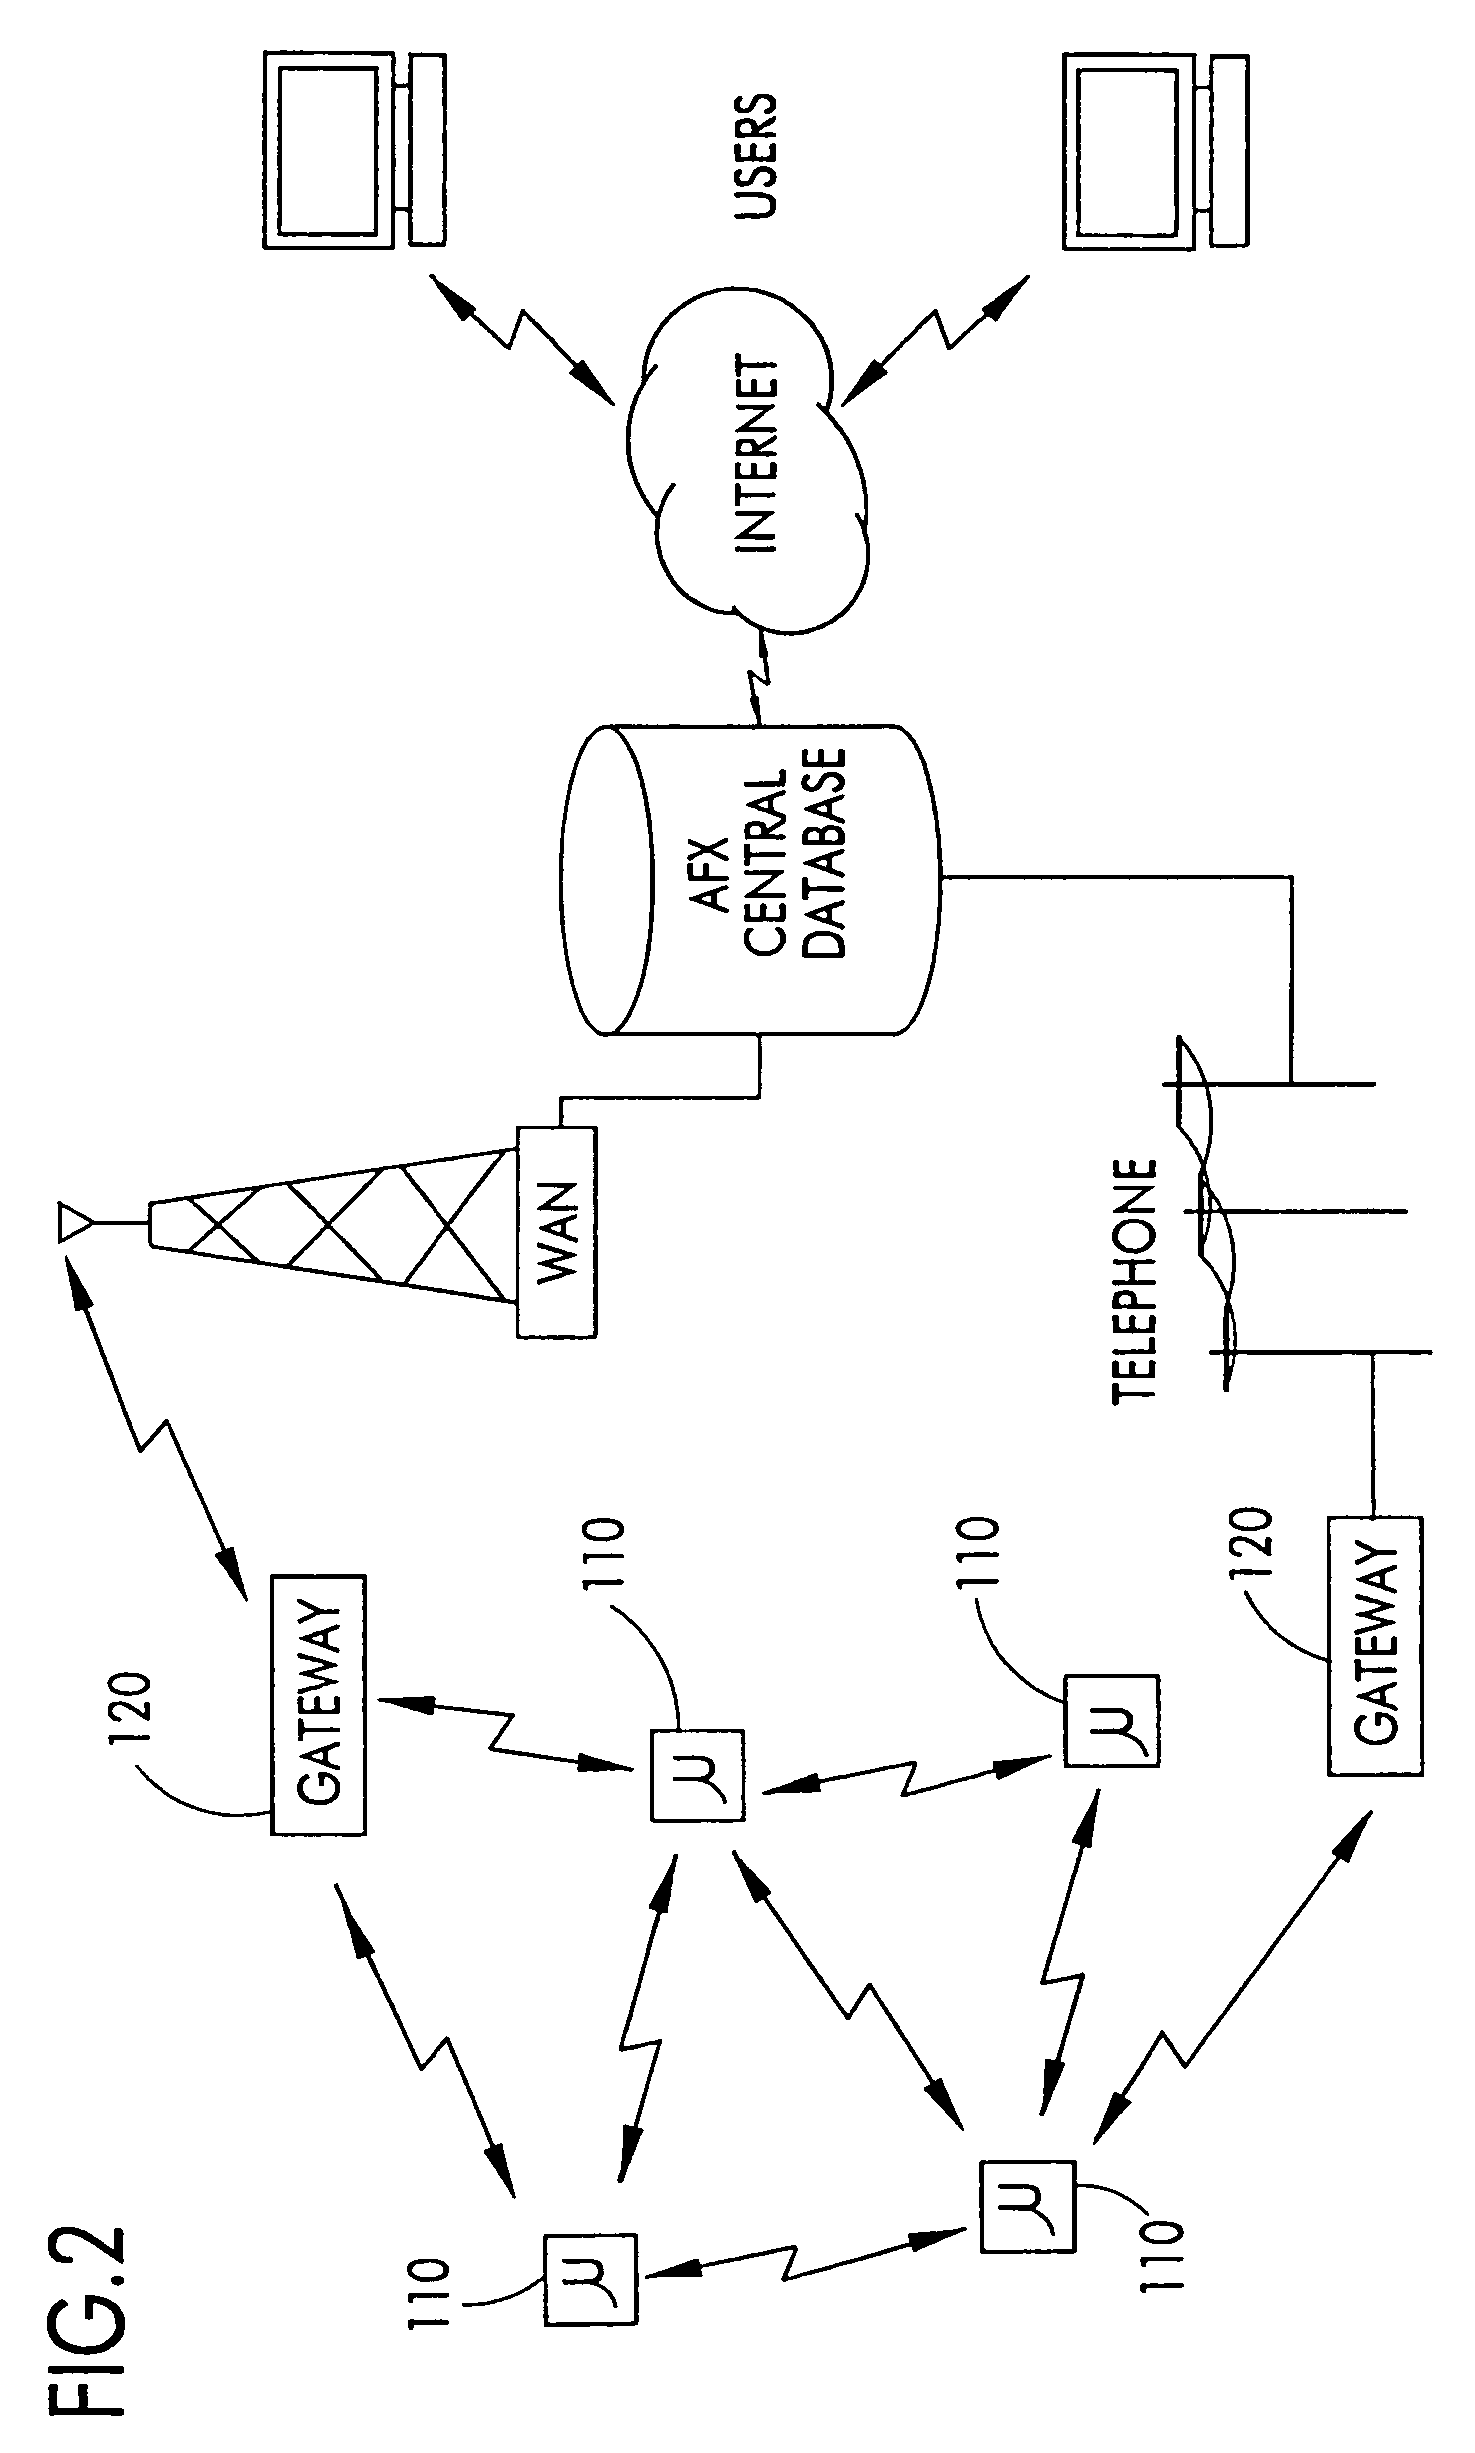 Node-to node messaging transceiver network with dynamic routing and configuring